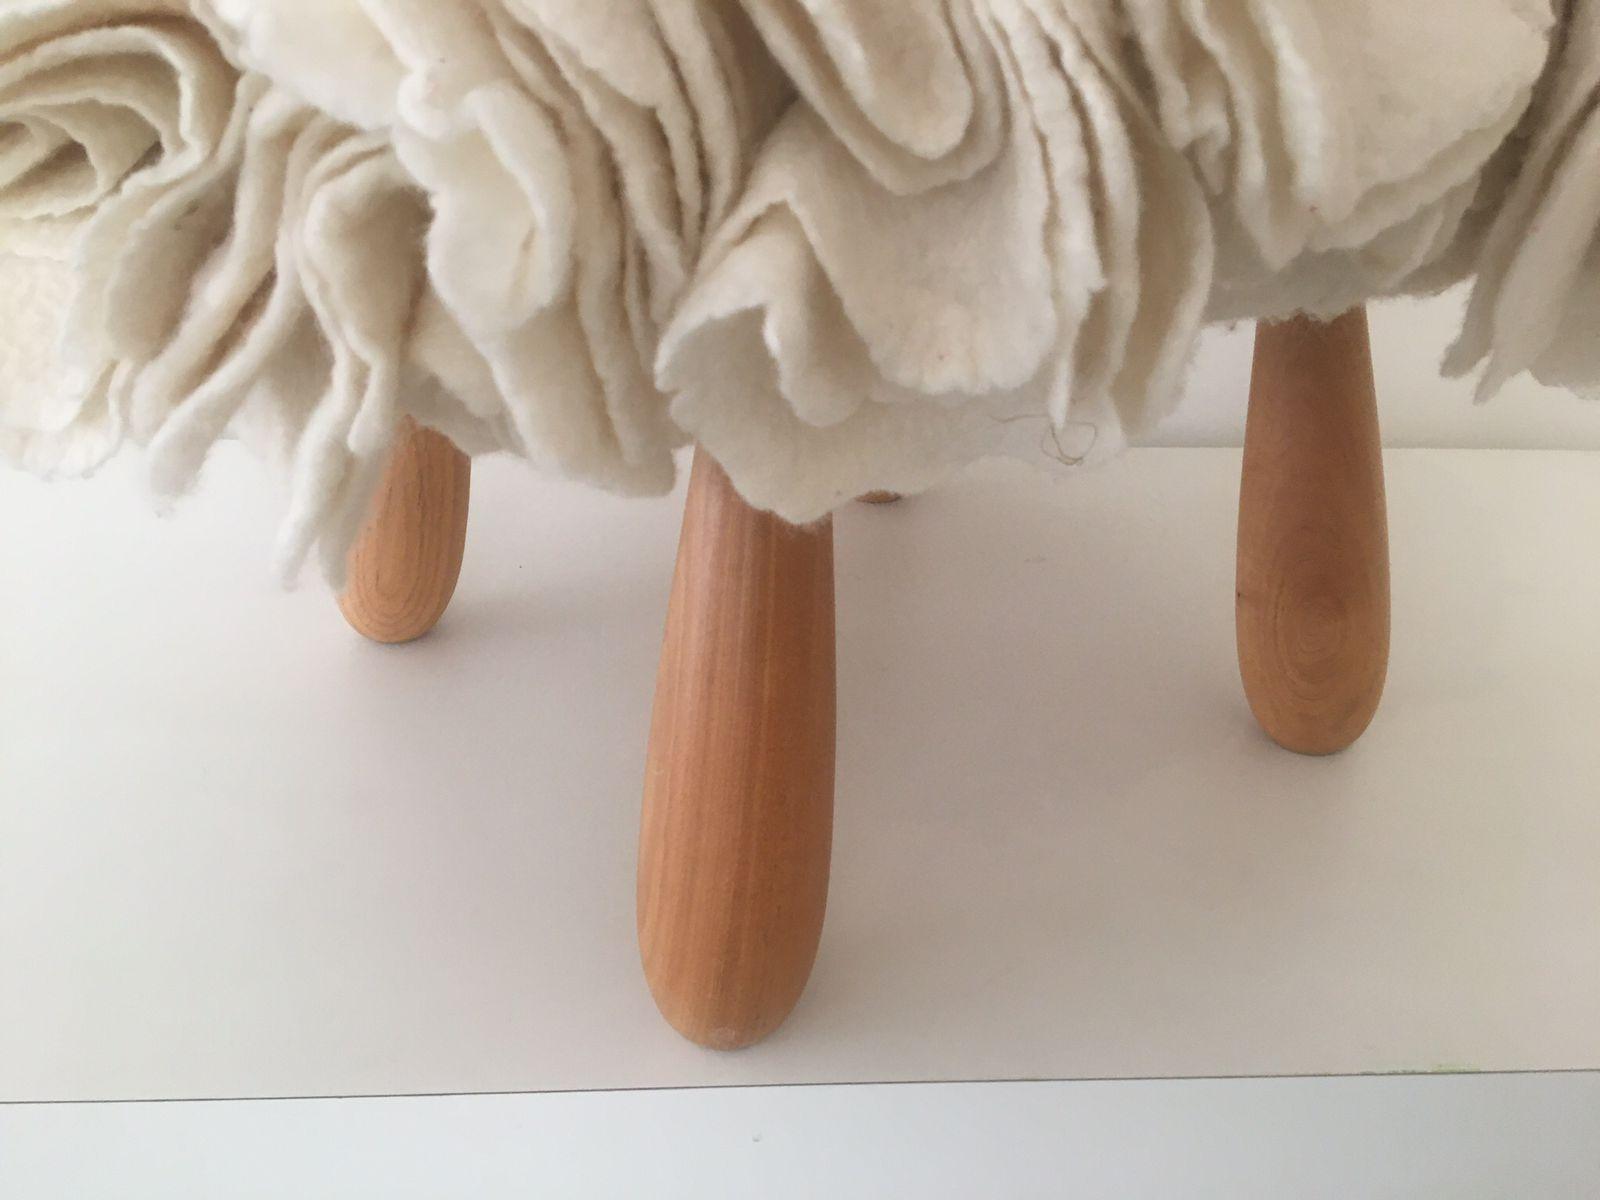 Full of personality, in order to create unique pieces, mixing ancient techniques for treating sheep wool with contemporary design and innovation, Inês Schertel is considered one of the most prominent names in the Brazilian design contemporary scene.